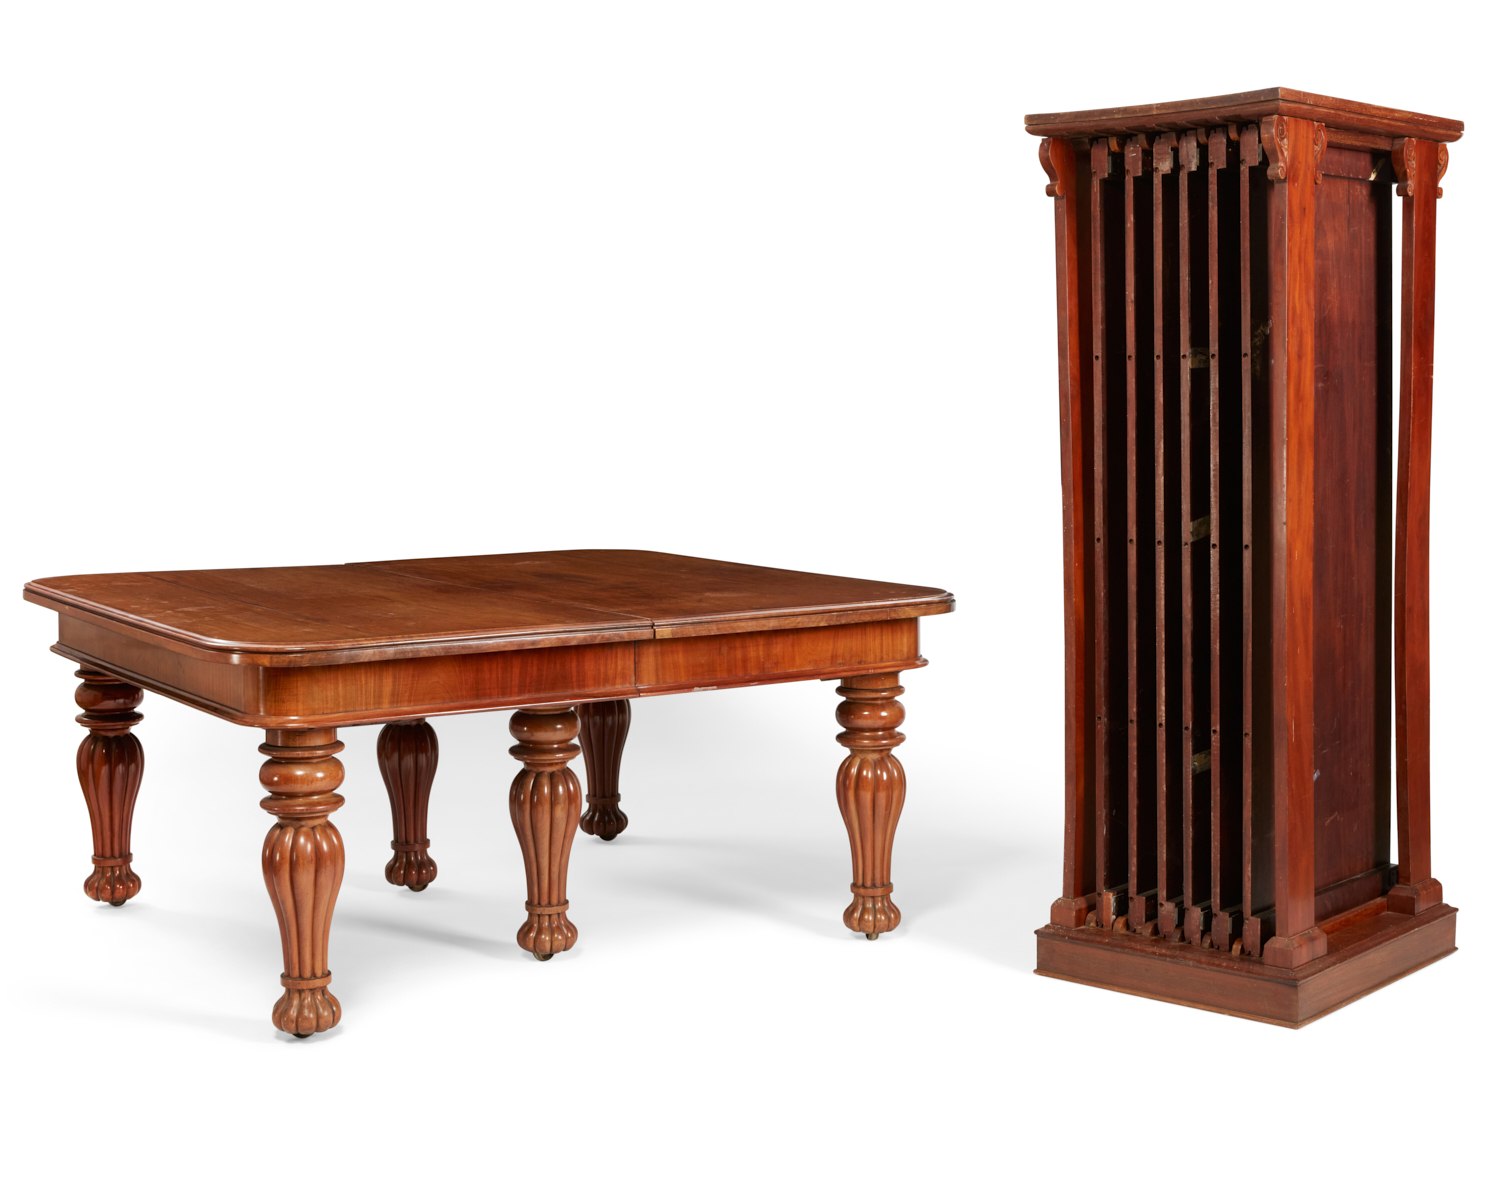 English mahogany extension dining table from the De Laurentiis collection, est. $2,000-$4,000